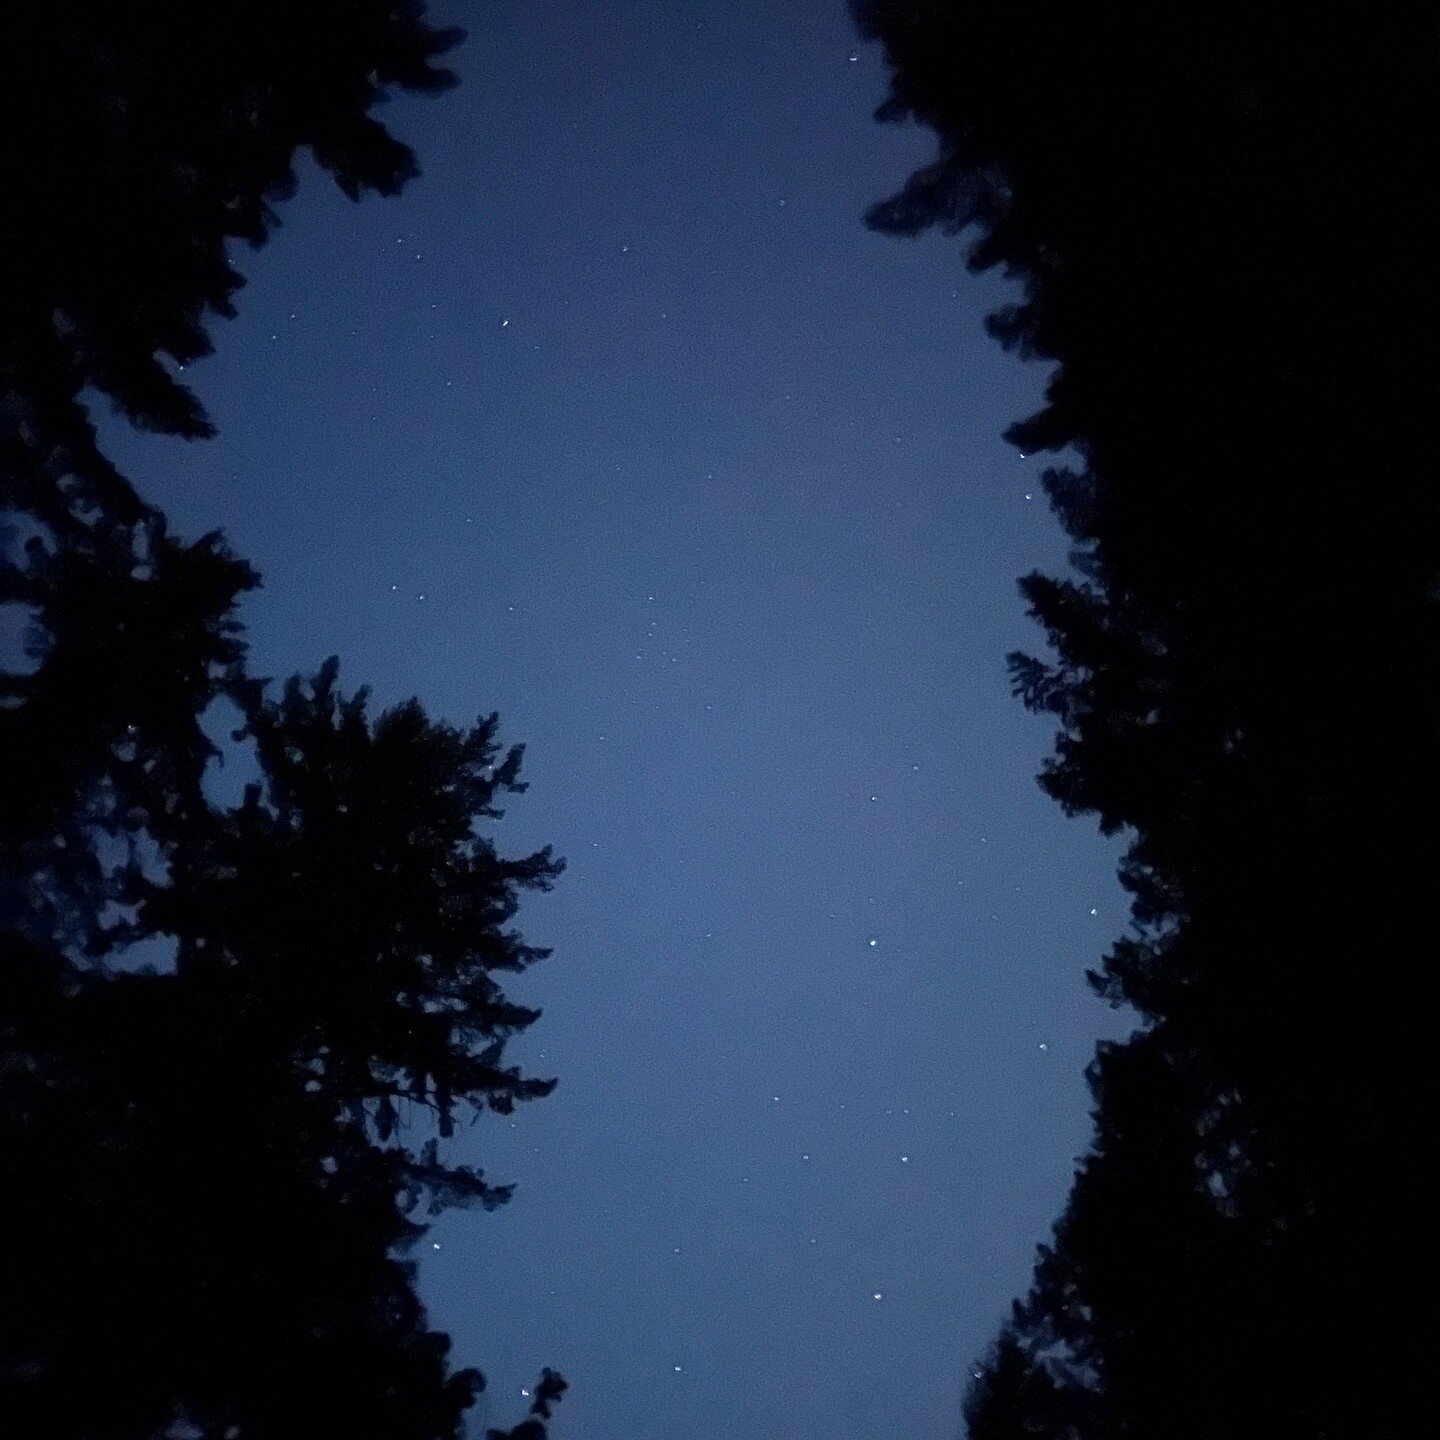 We took a magical night walk out amongst the trees and stars last night here in #washingtonstate 

#pnw #pnwlife #starwalk #duvallwa